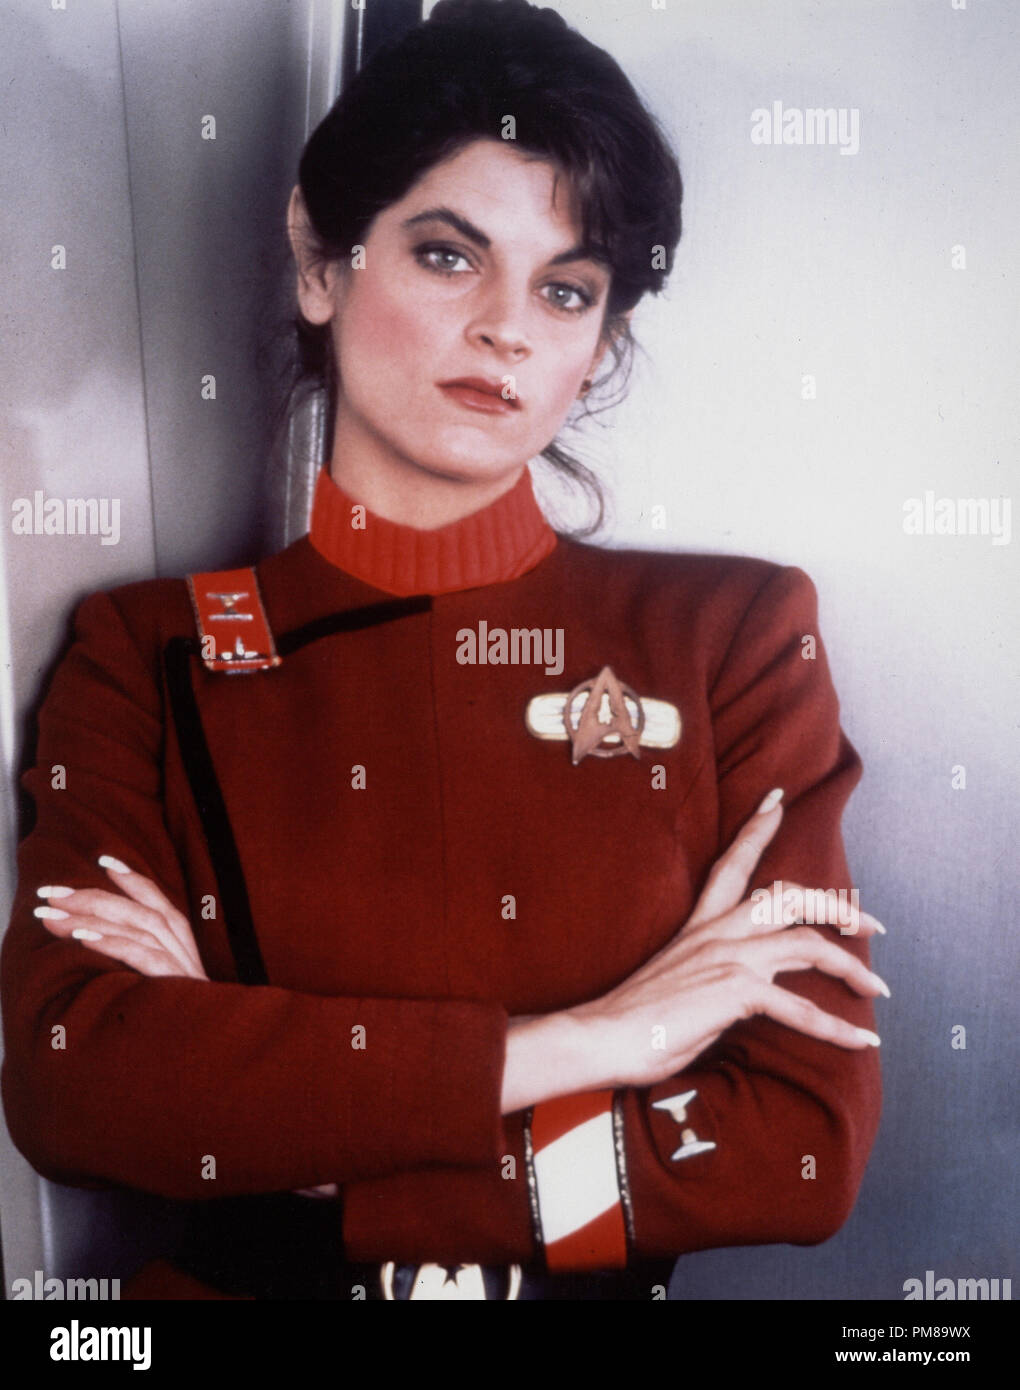 Studio Publicity Still from 'Star Trek II: The Wrath of Khan' Kirstie Alley © 1982 Paramount  All Rights Reserved   File Reference # 31710105THA  For Editorial Use Only Stock Photo